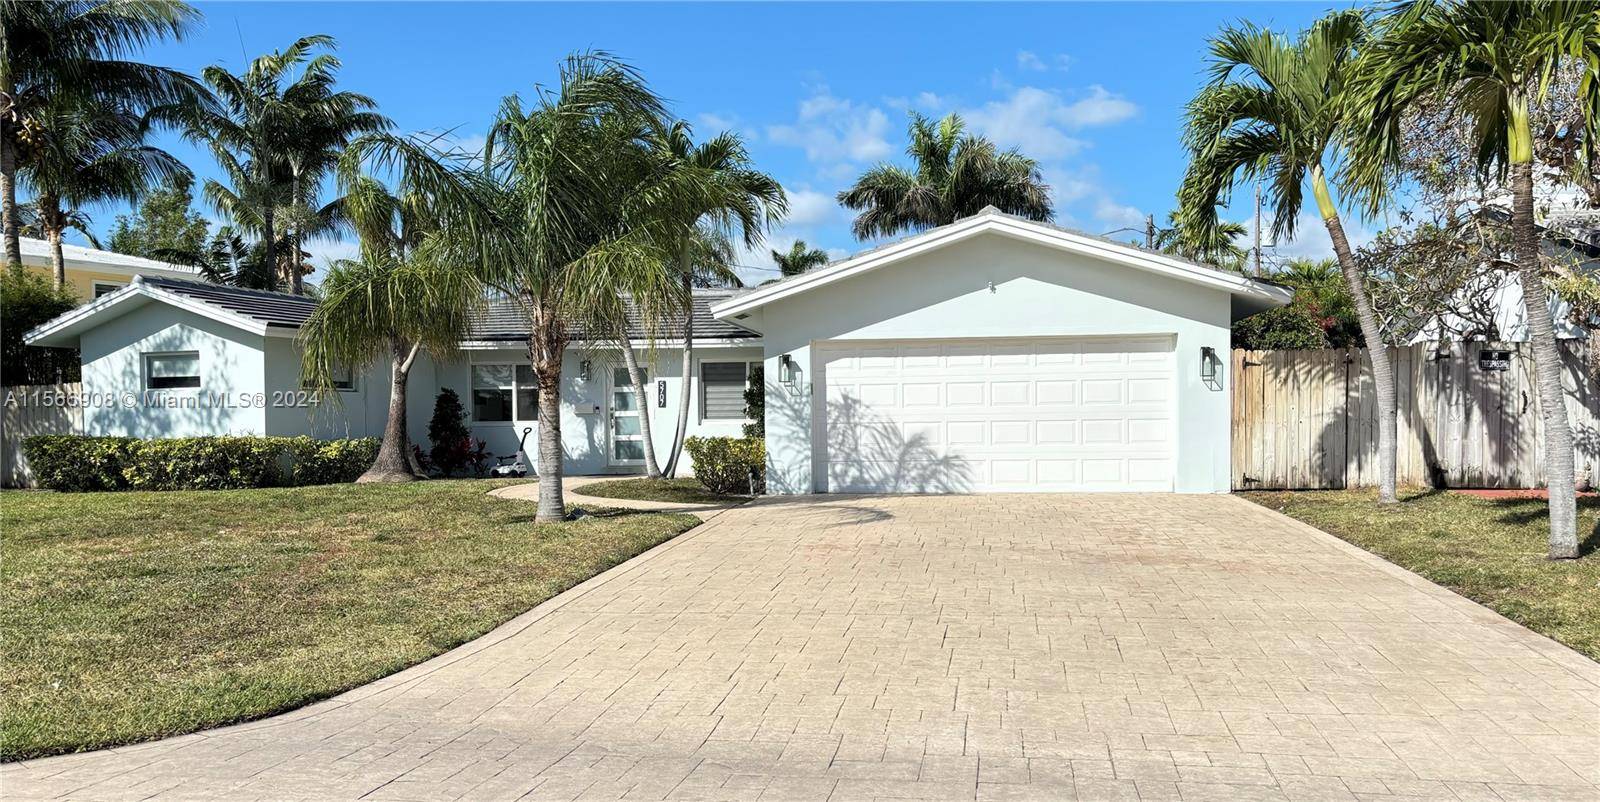 Nestled in the heart of Coral Ridge Isles, this charming home is a true find for its fortunate new owners !